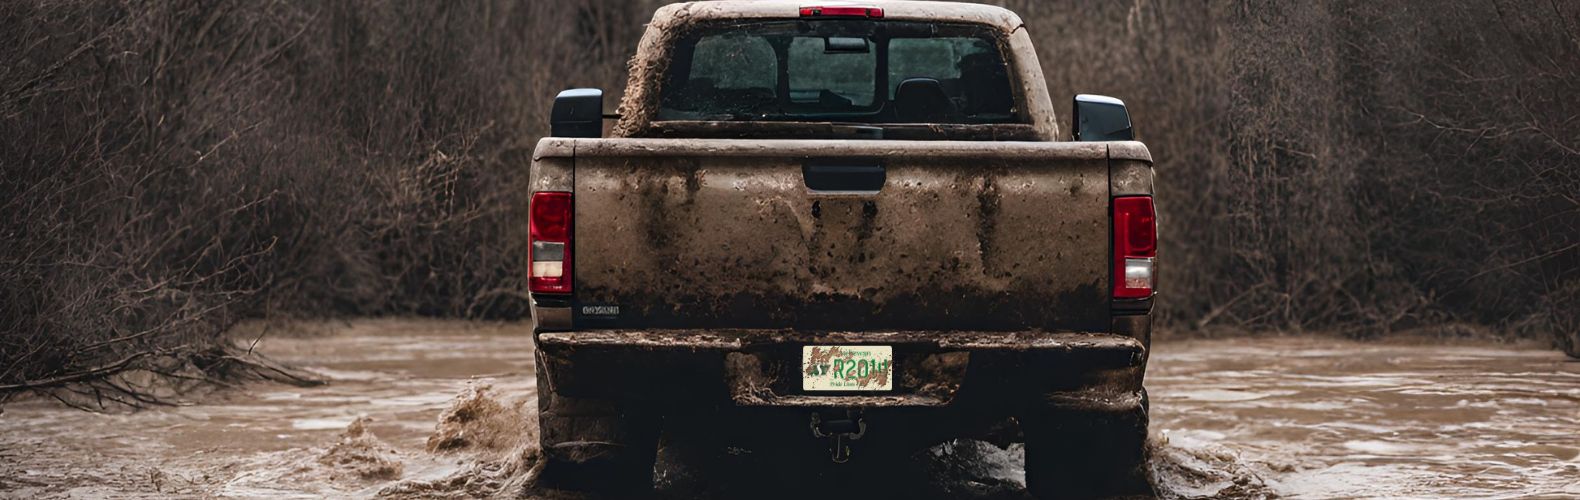 back of truck covered in mud with Rider plate